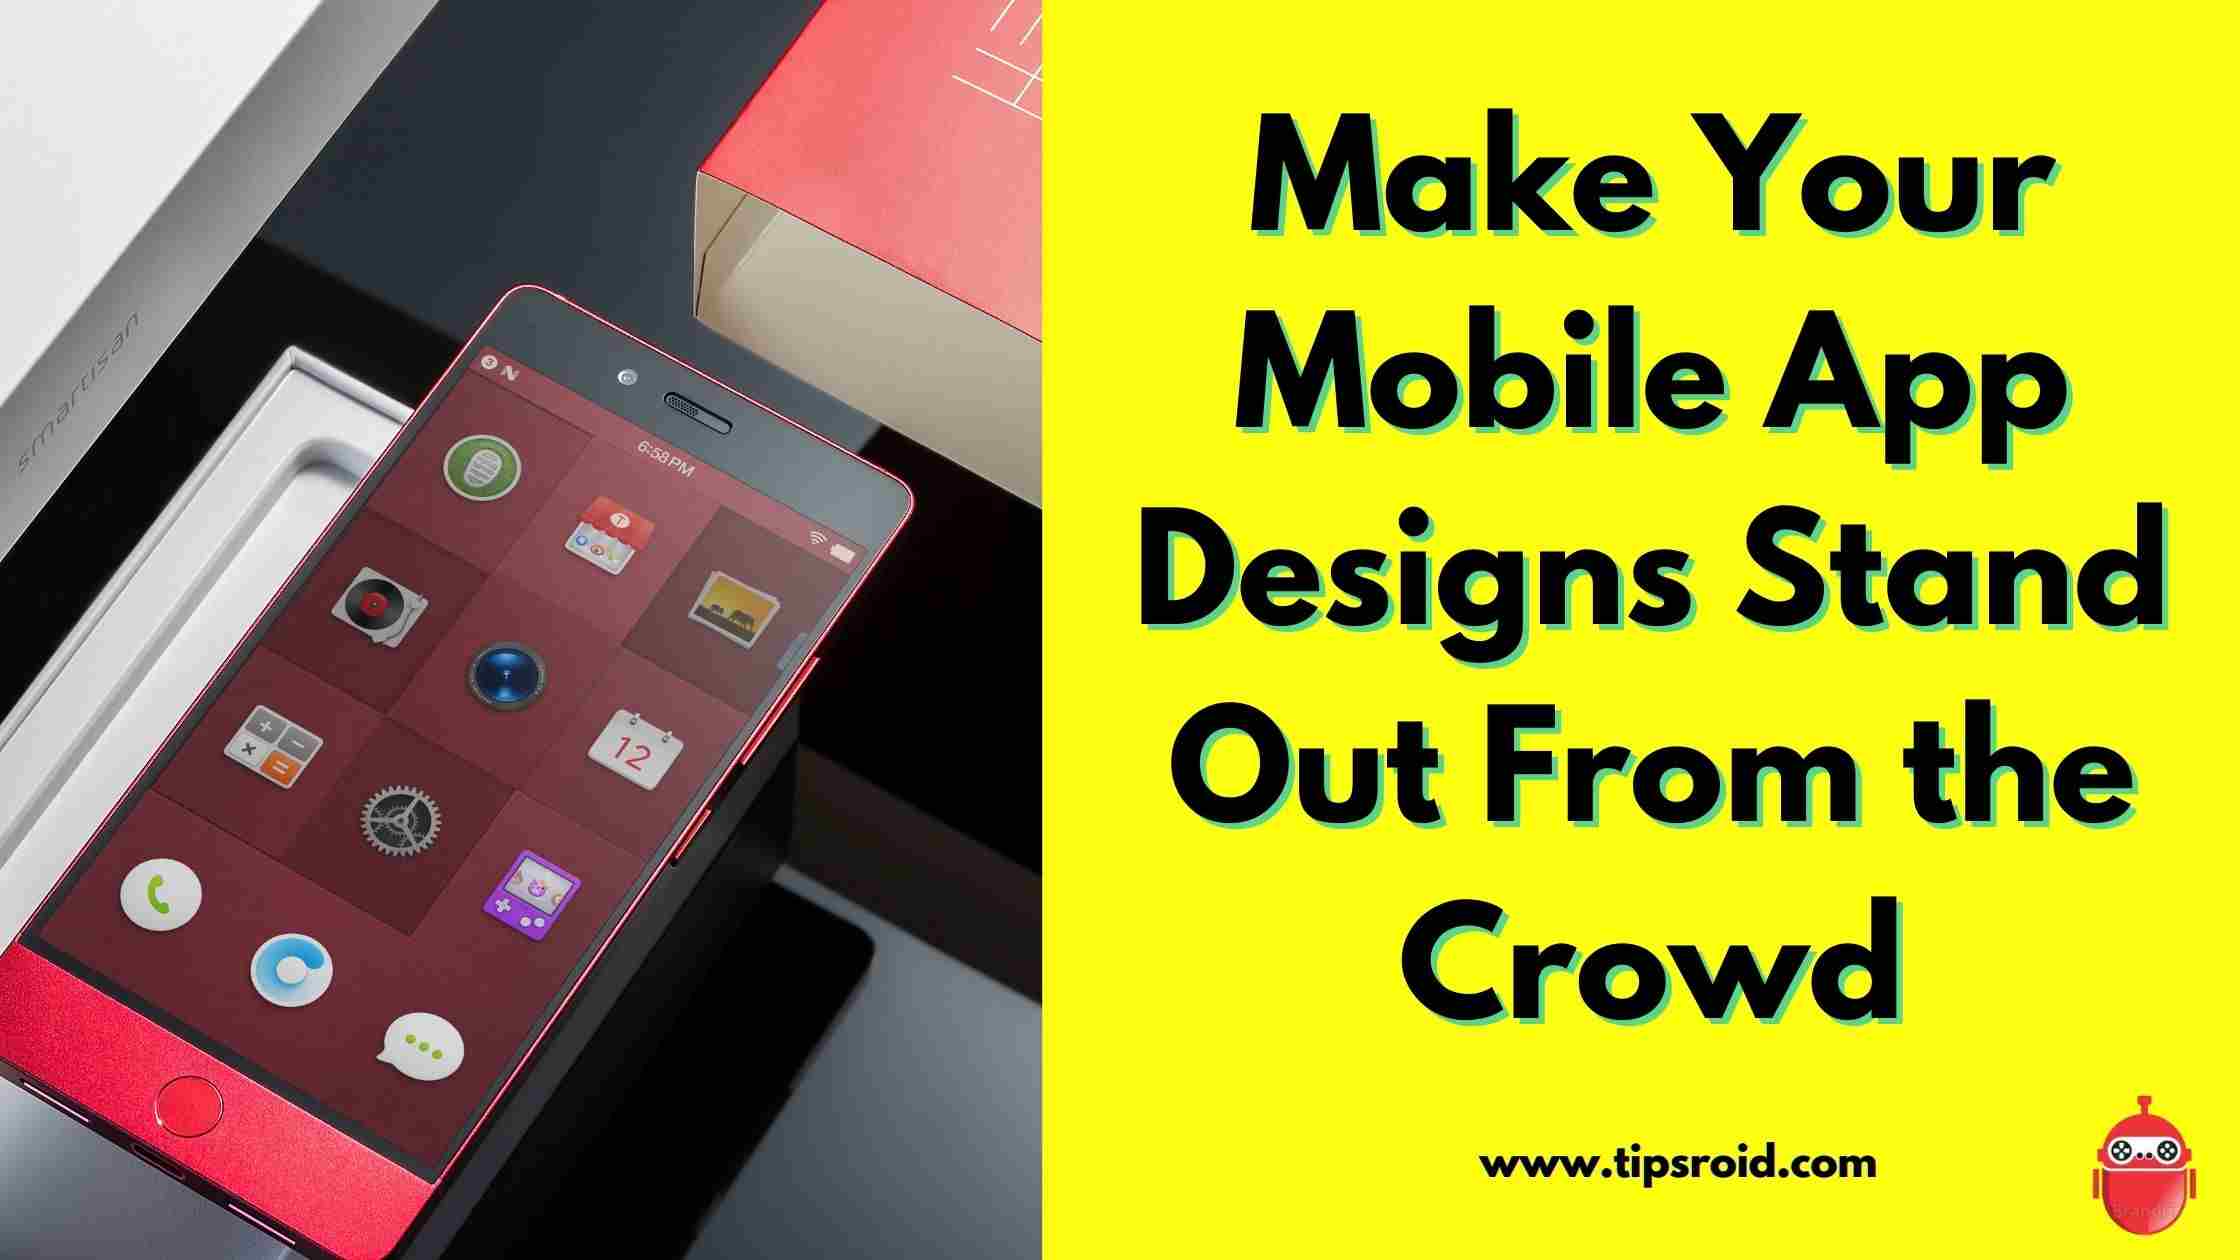 6 Ways to Make Your Mobile App Designs Stand Out From the Crowd